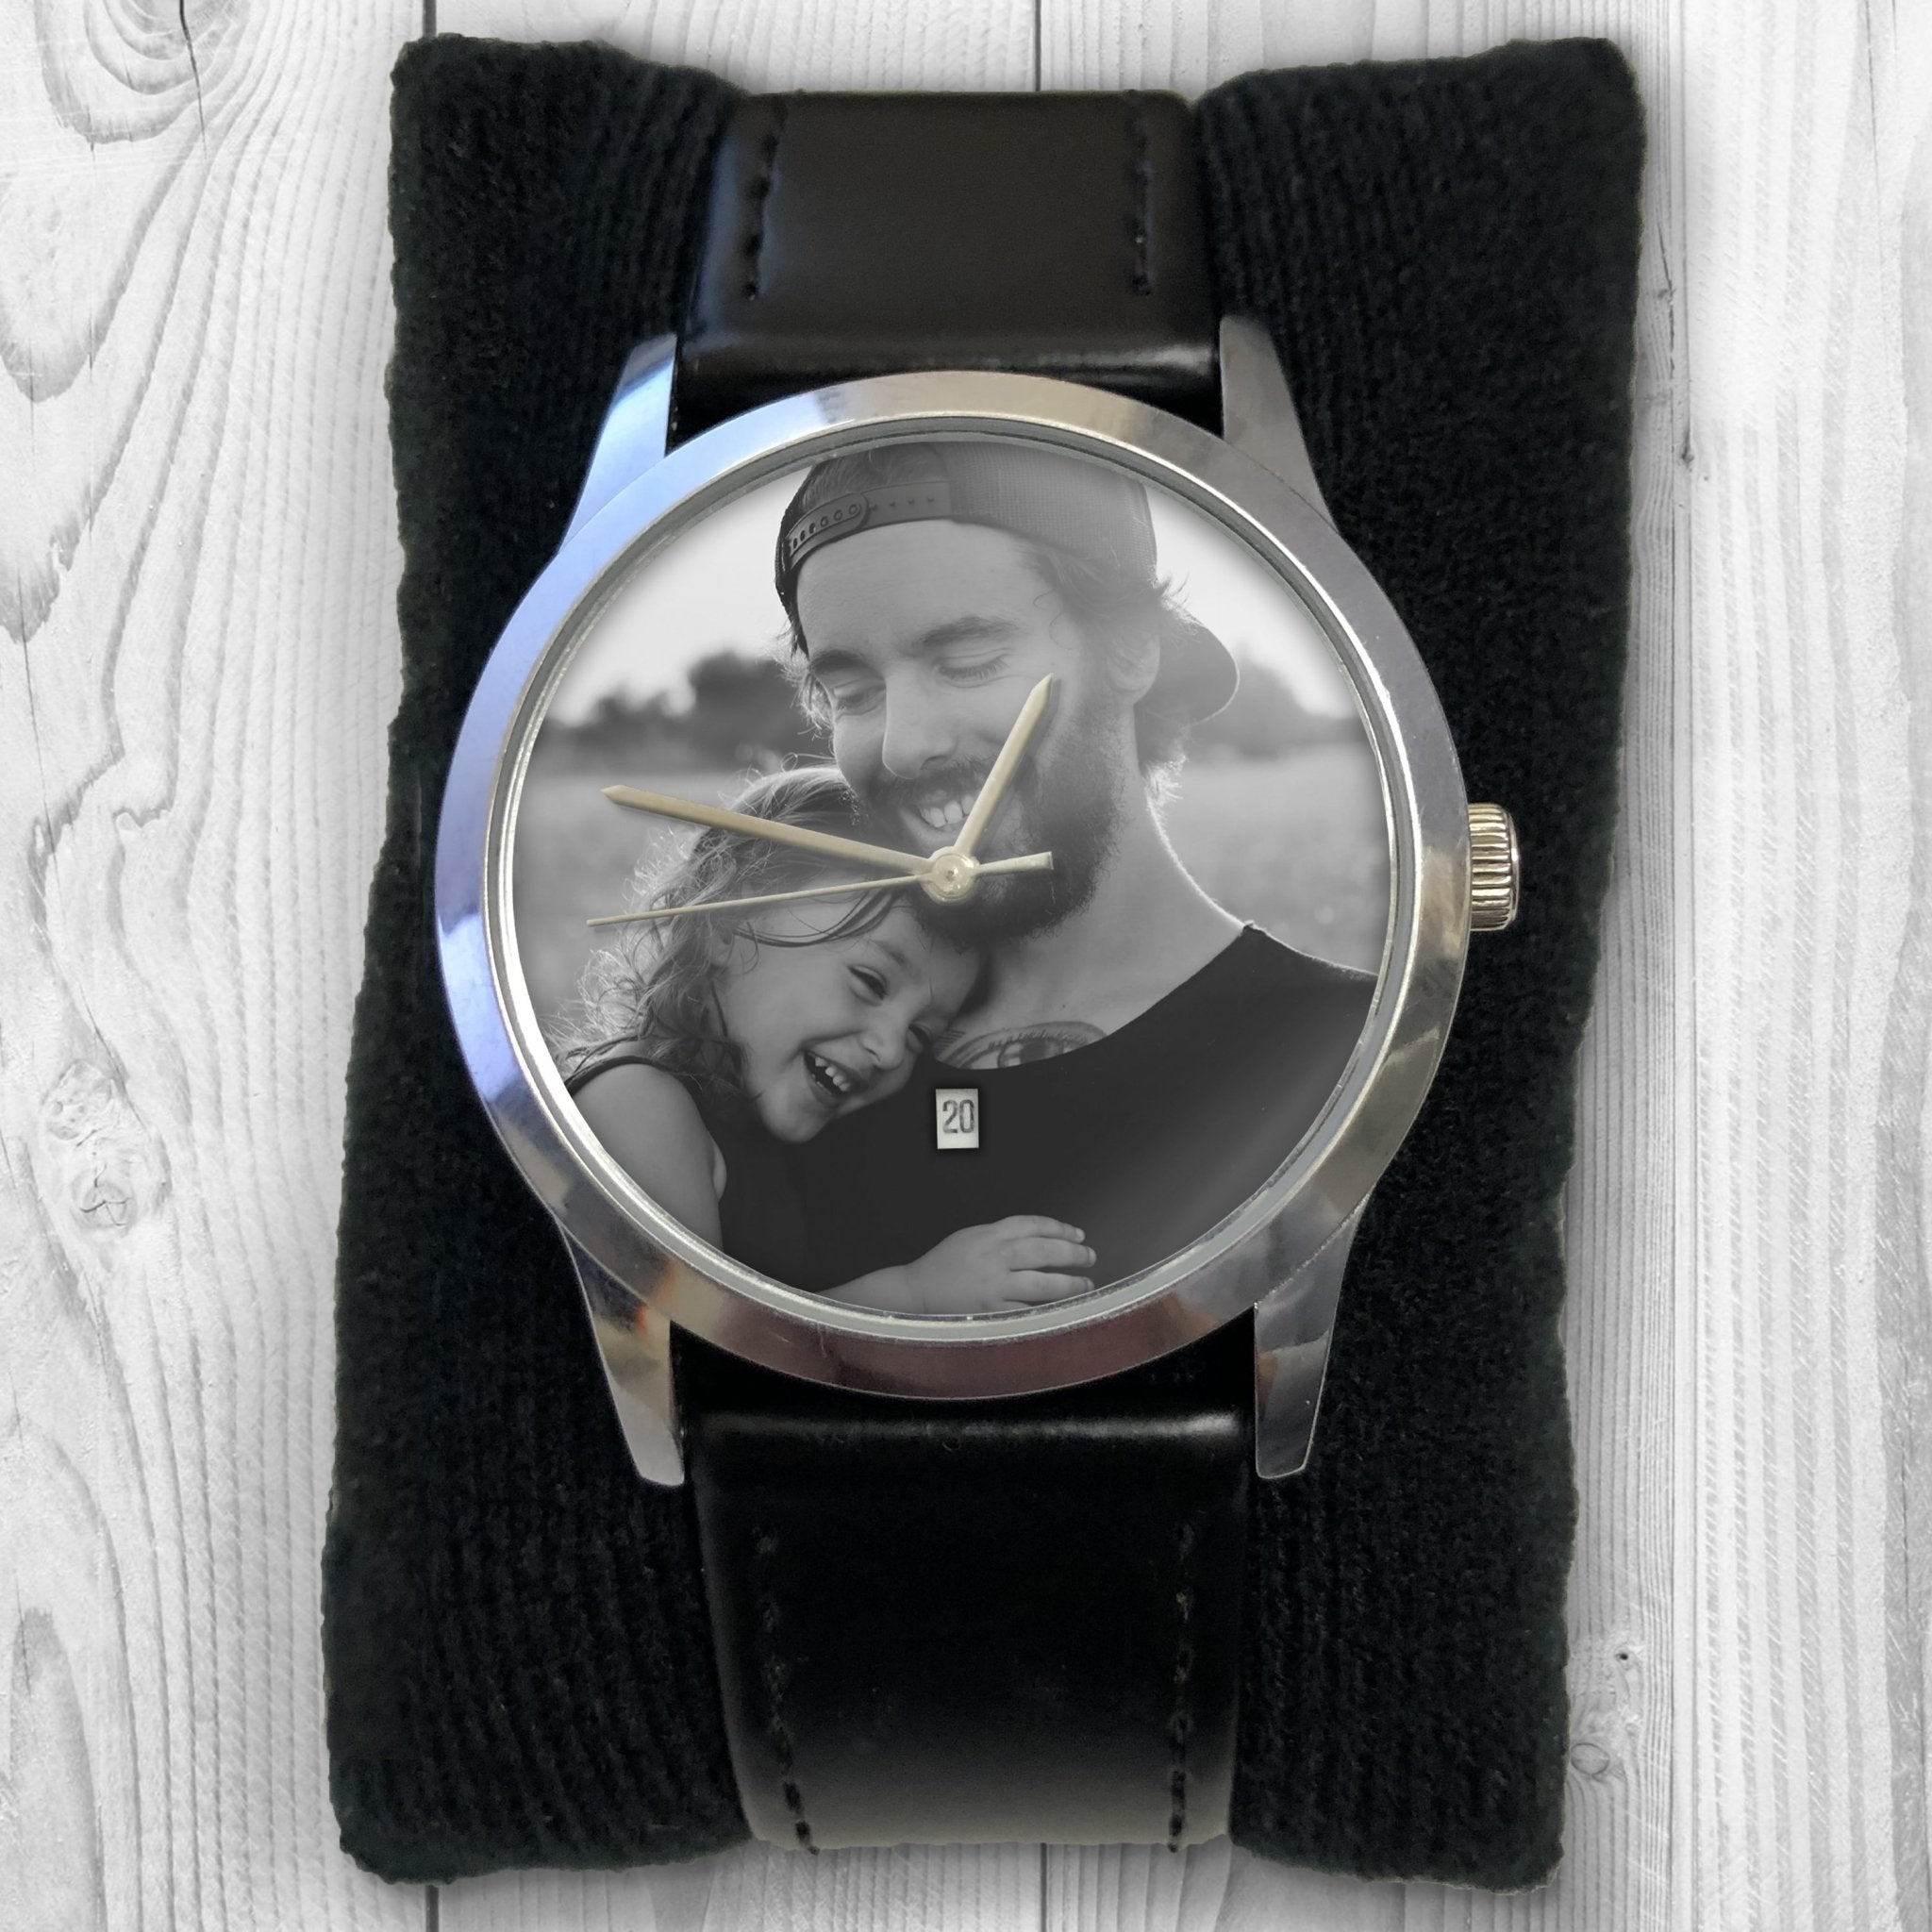 Fathers Day Gift For Dad From Daughter, Gift Idea From Son, Personalized Gifts For Dad, Dad Birthday Gift Watch - UniquePrintsStore